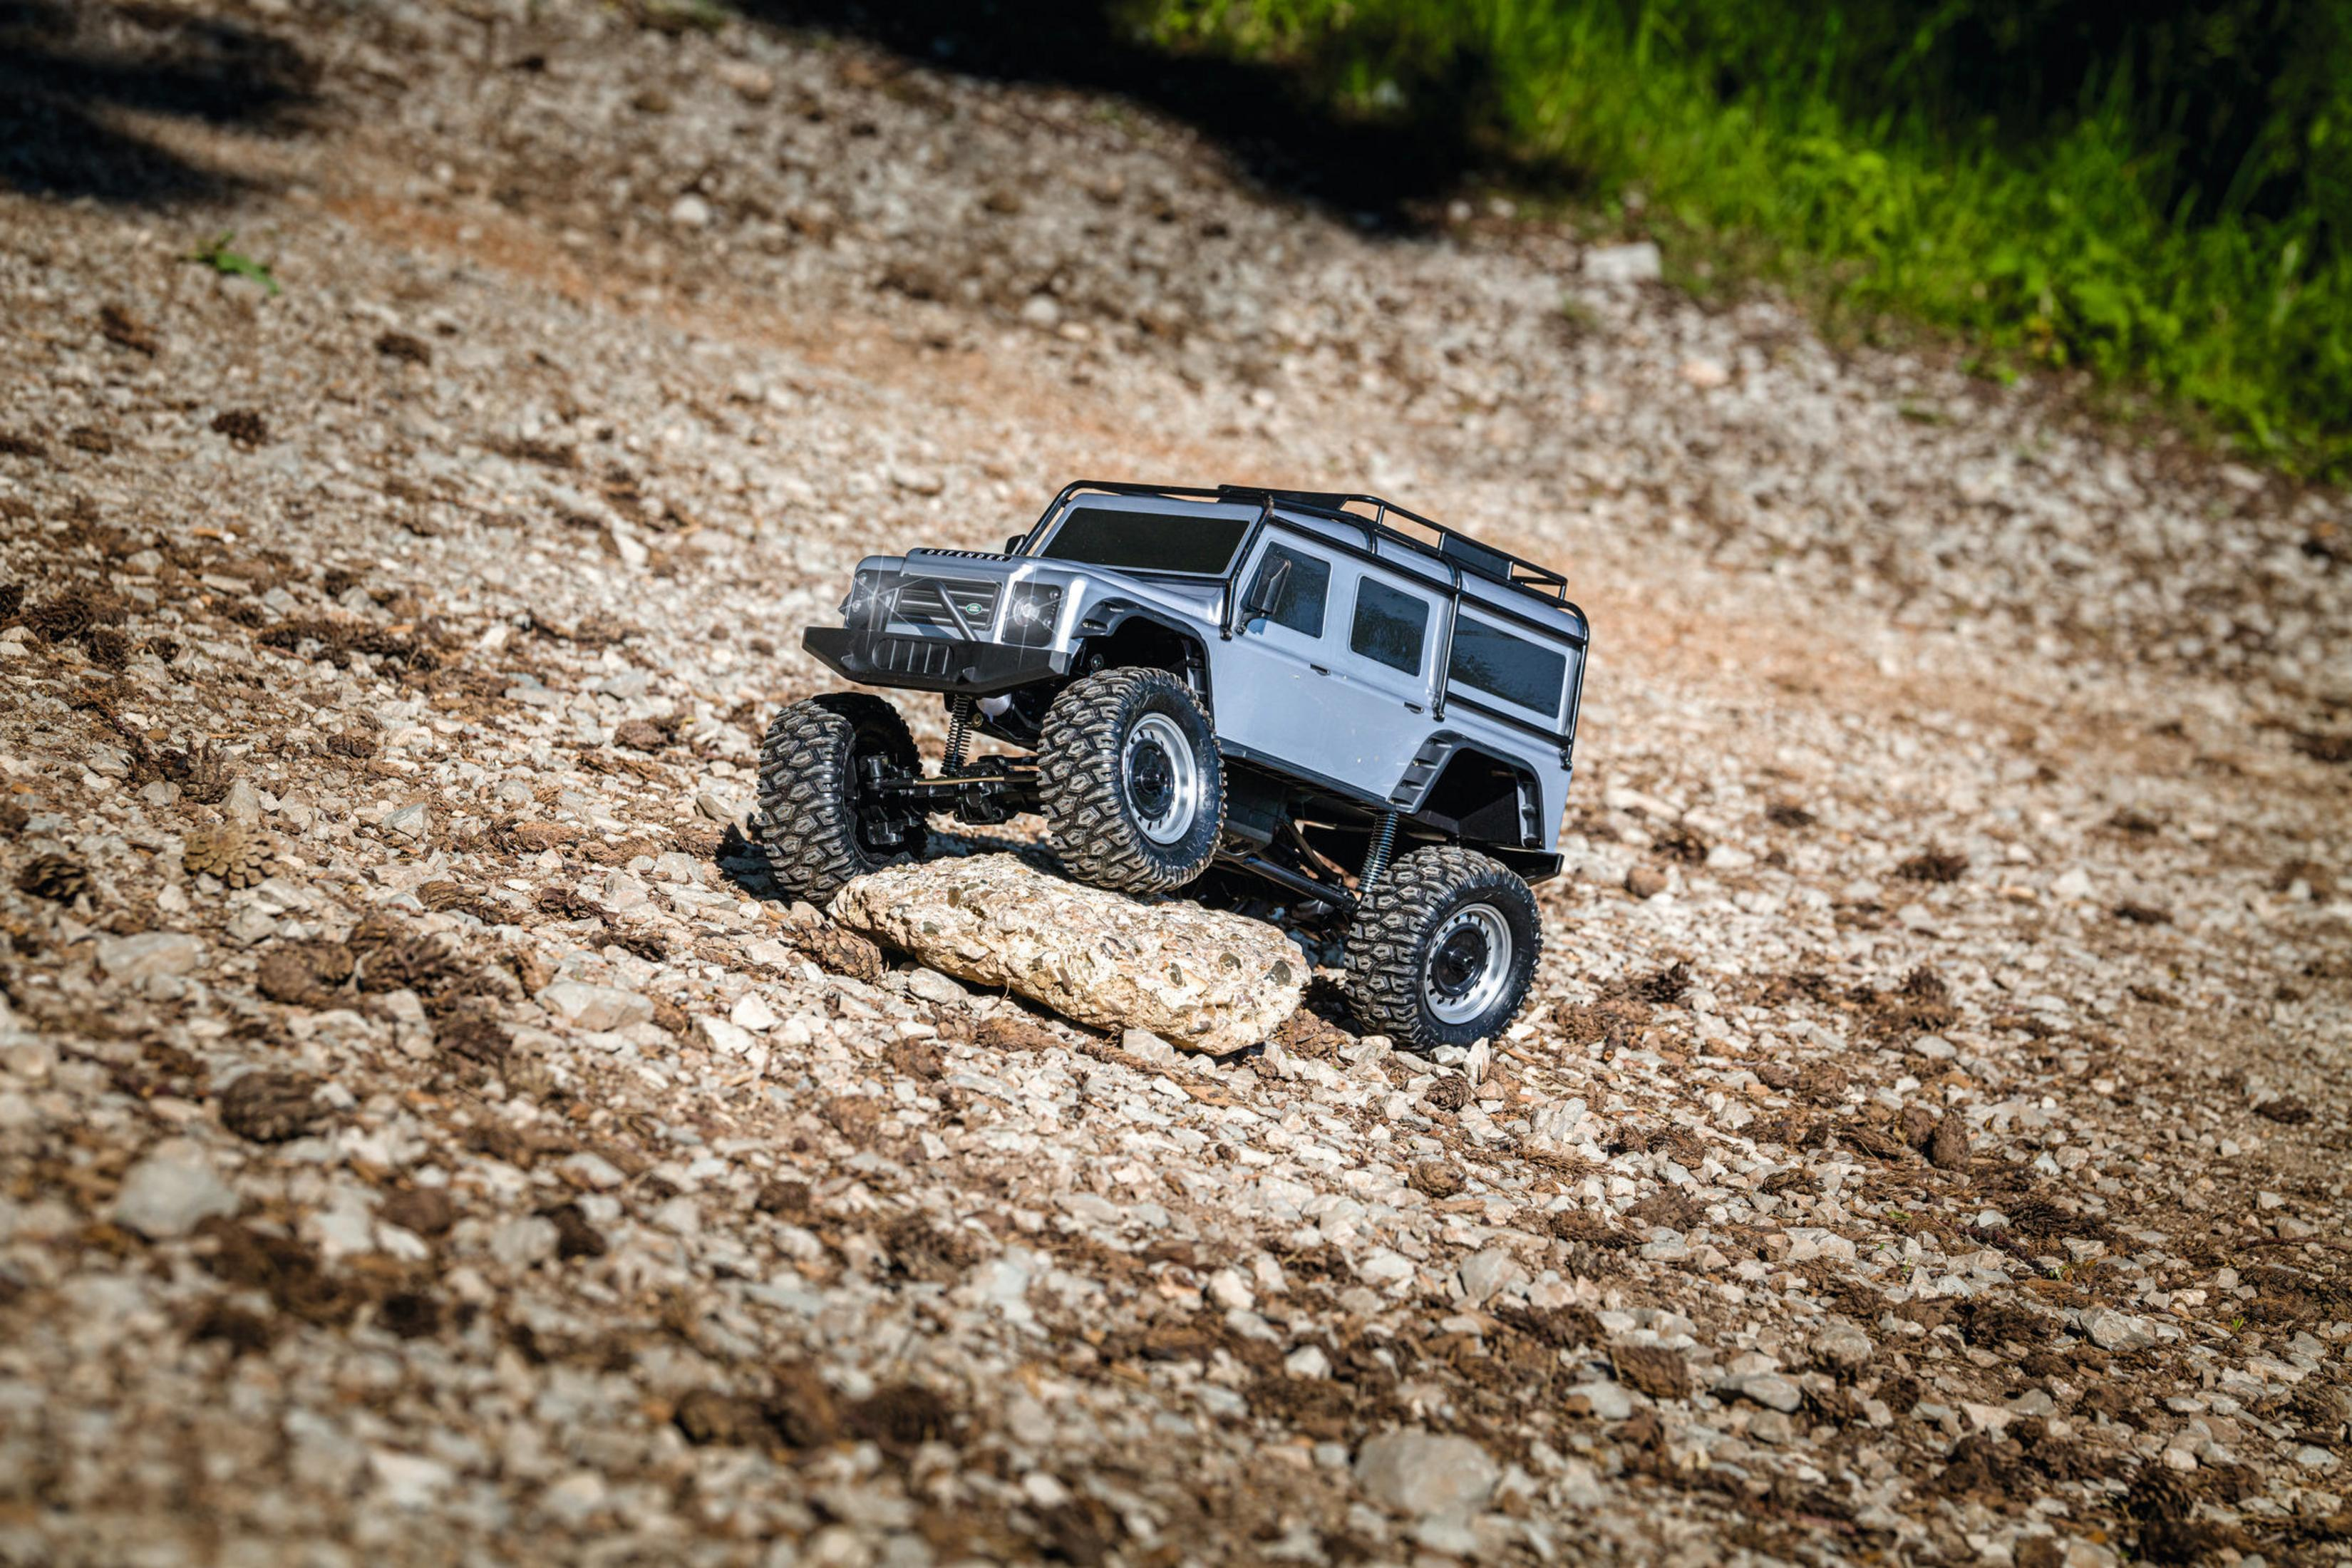 Silber LAND 500404172 Spielzeugmodell, 1:8 RTR DEFENDER CARSON ROVER SILBER 100%